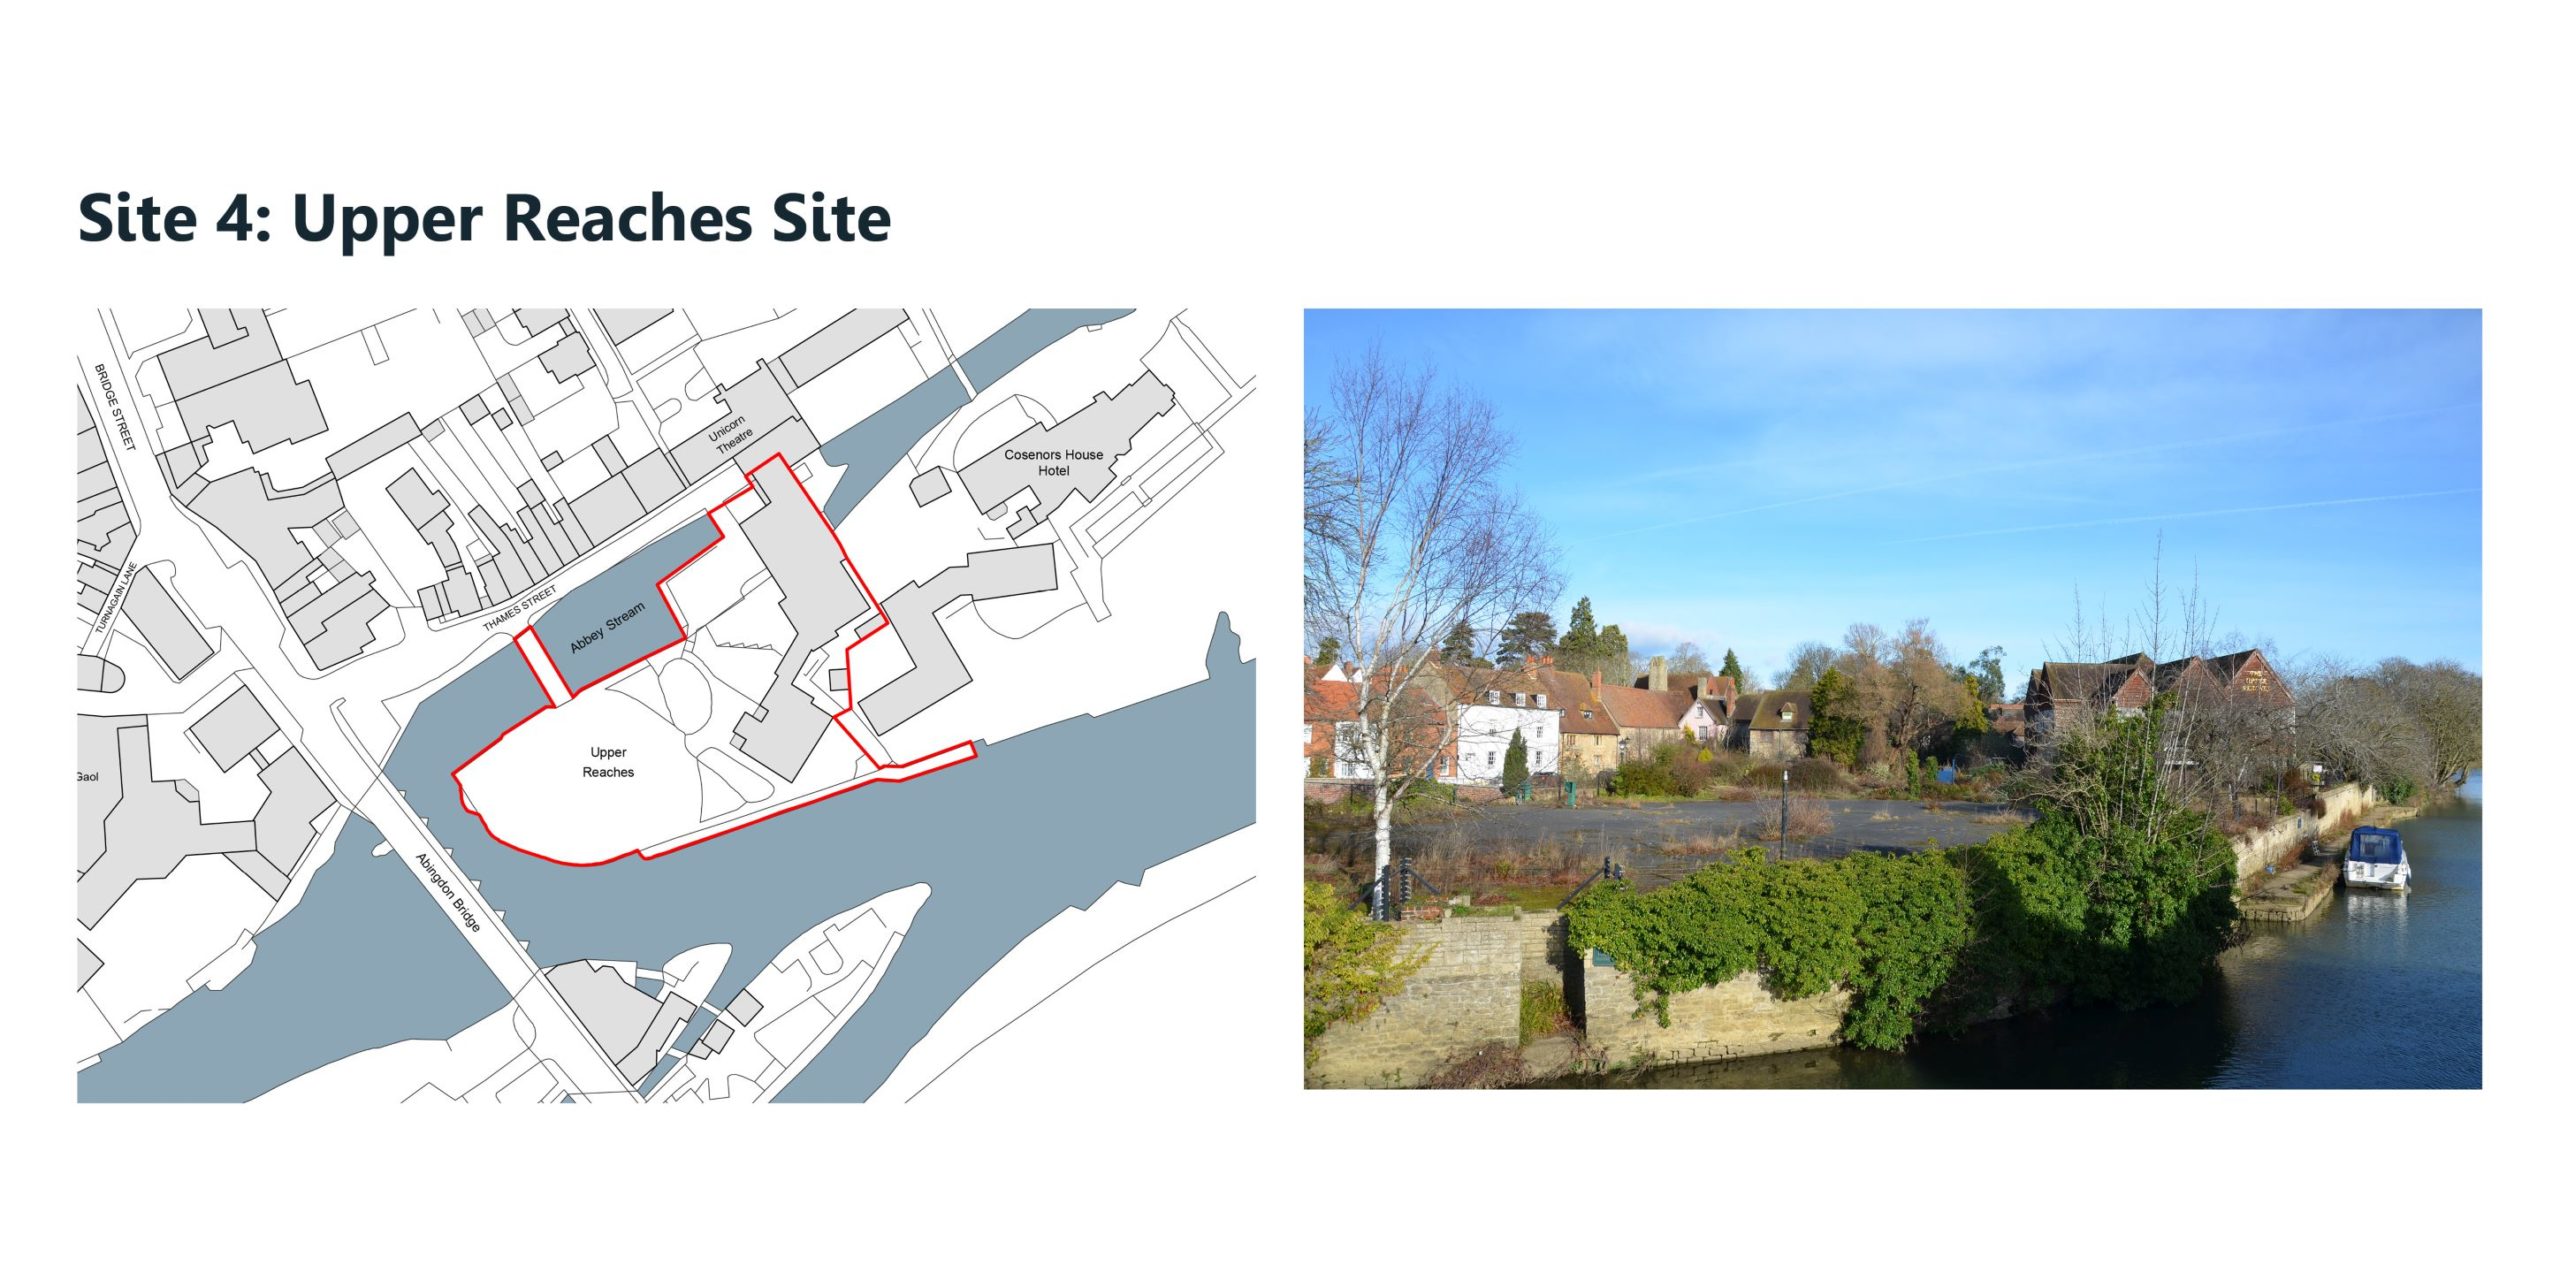 (left) Location plan of Upper Reaches site. The site is bounded by the River Thames to the south and Thames Street to the north. It includes a vacant Grade II listed building within the site boundary. (right) a photograph of the Upper Reaches site taken from Abingdon Bridge.